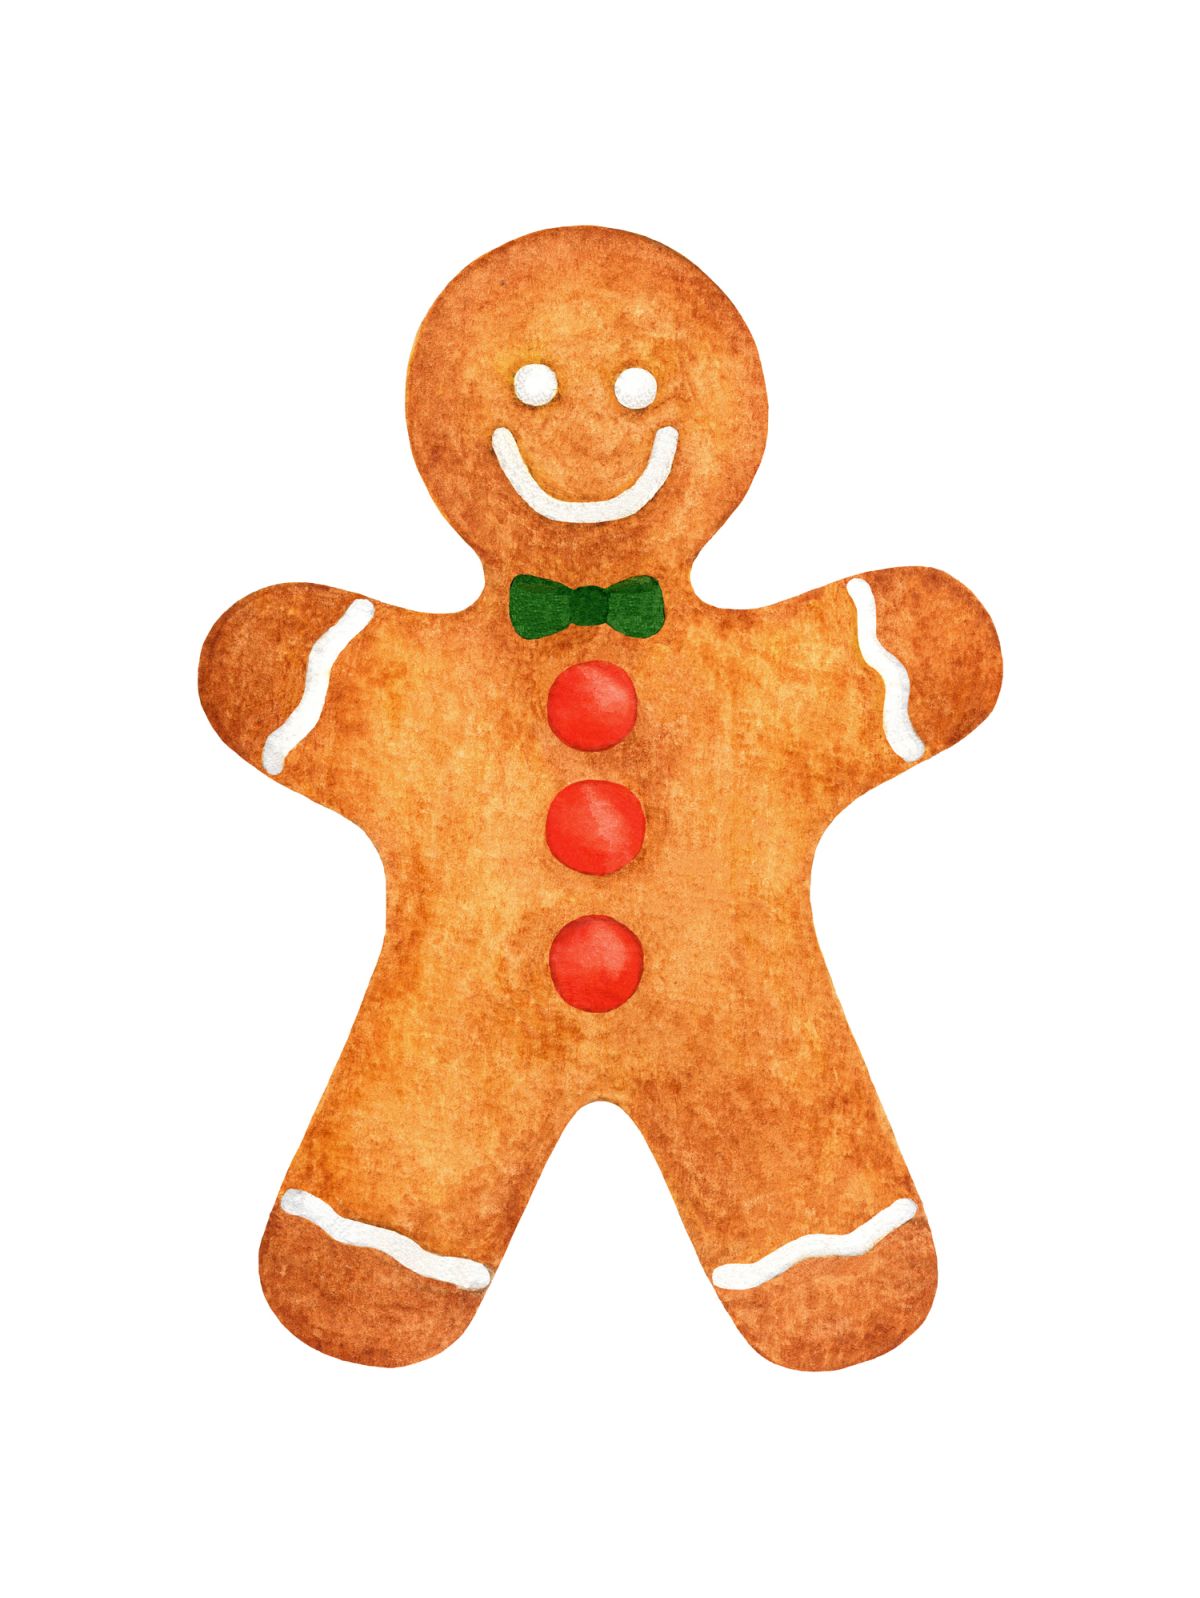 How To Draw A Gingerbread Man